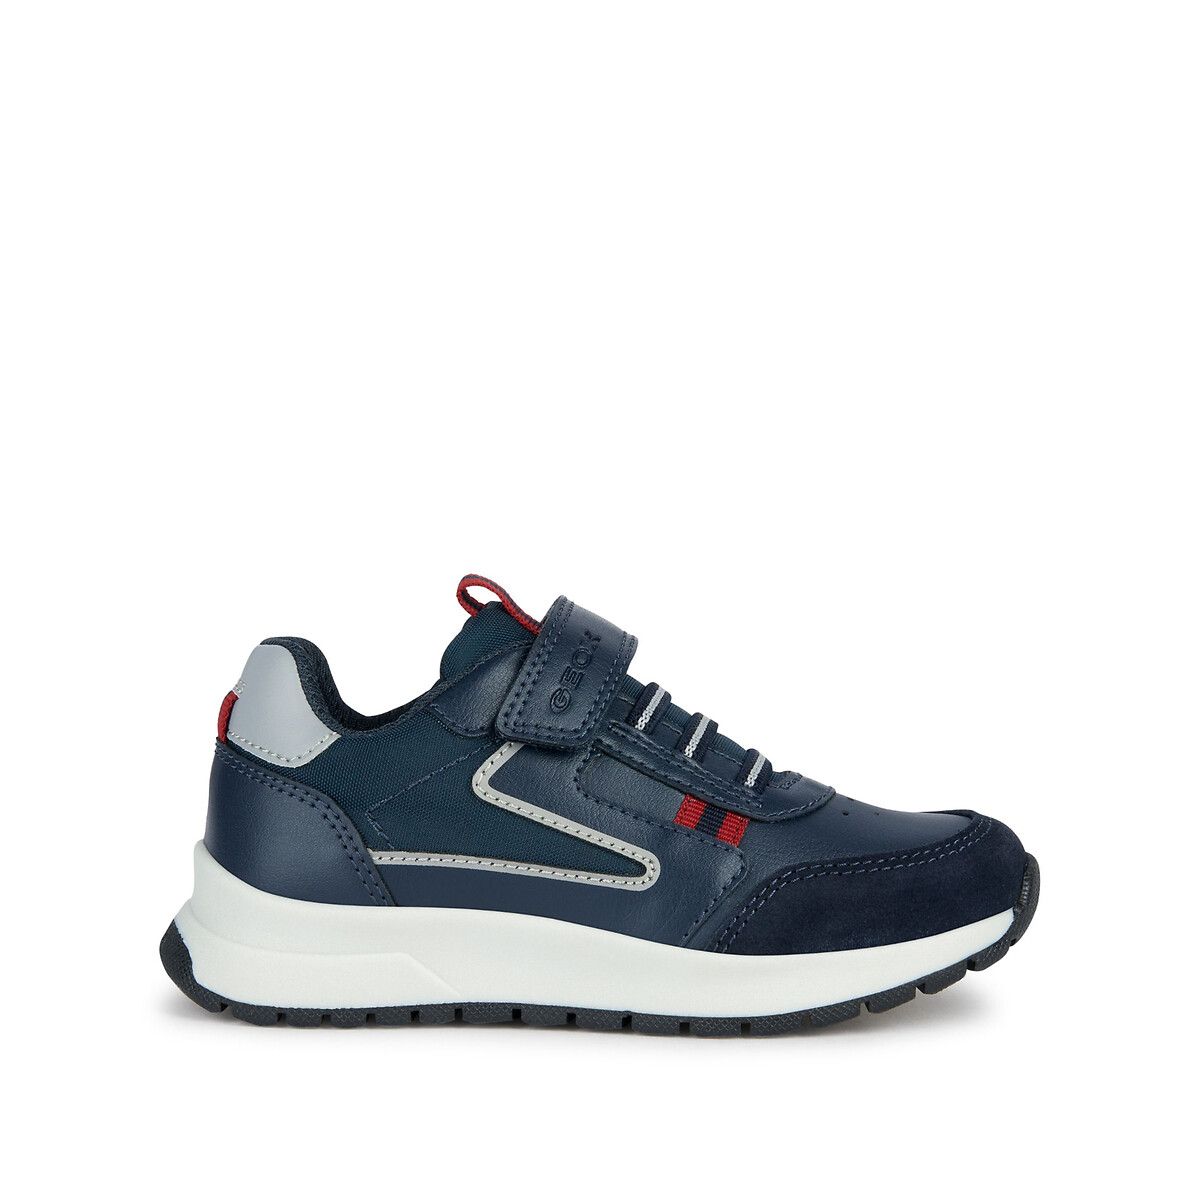 Image of Kids Briezee Breathable Trainers